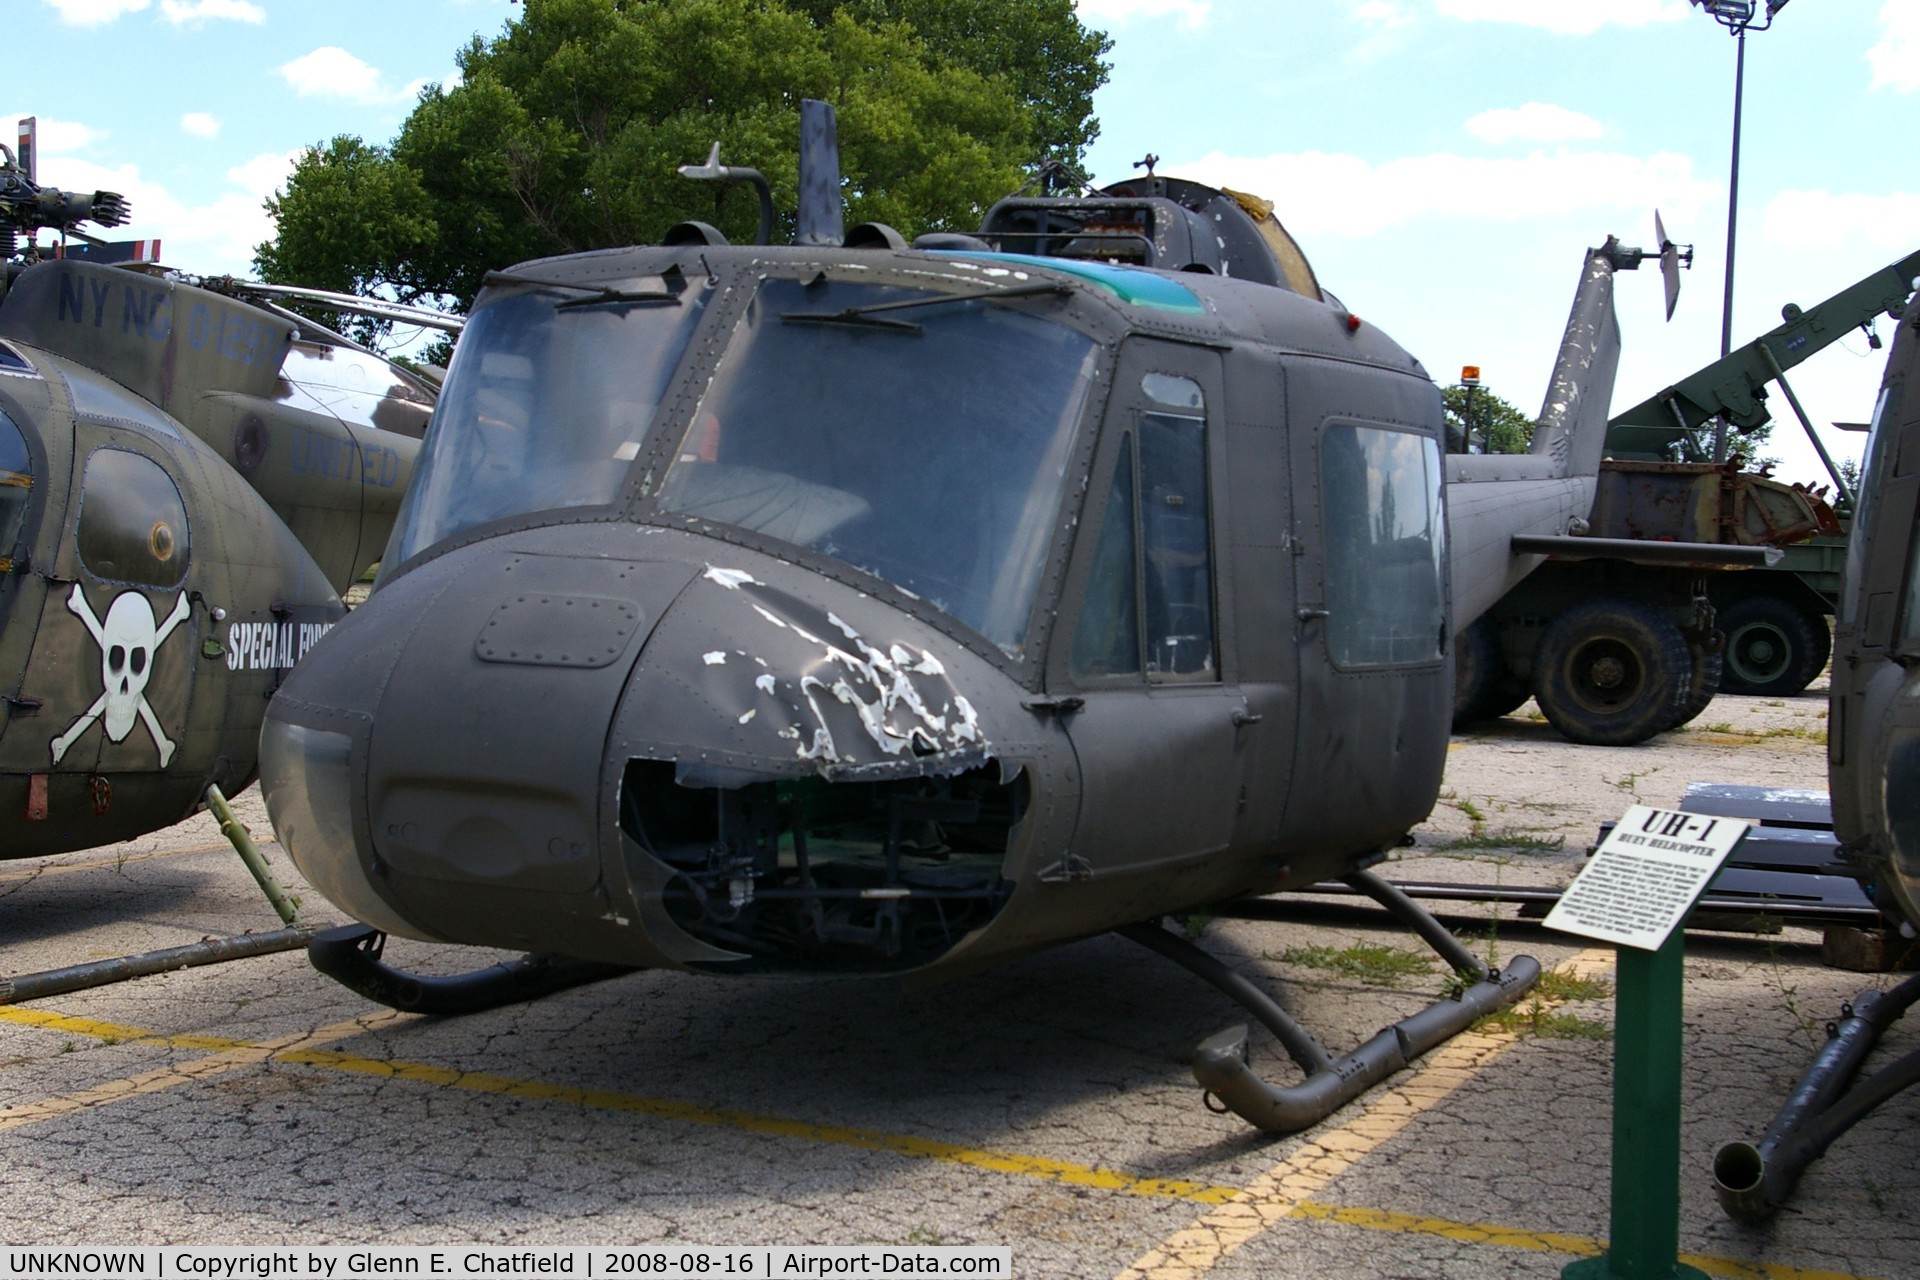 UNKNOWN, , At the Russell Military Museum, Russell, IL  UH-1B